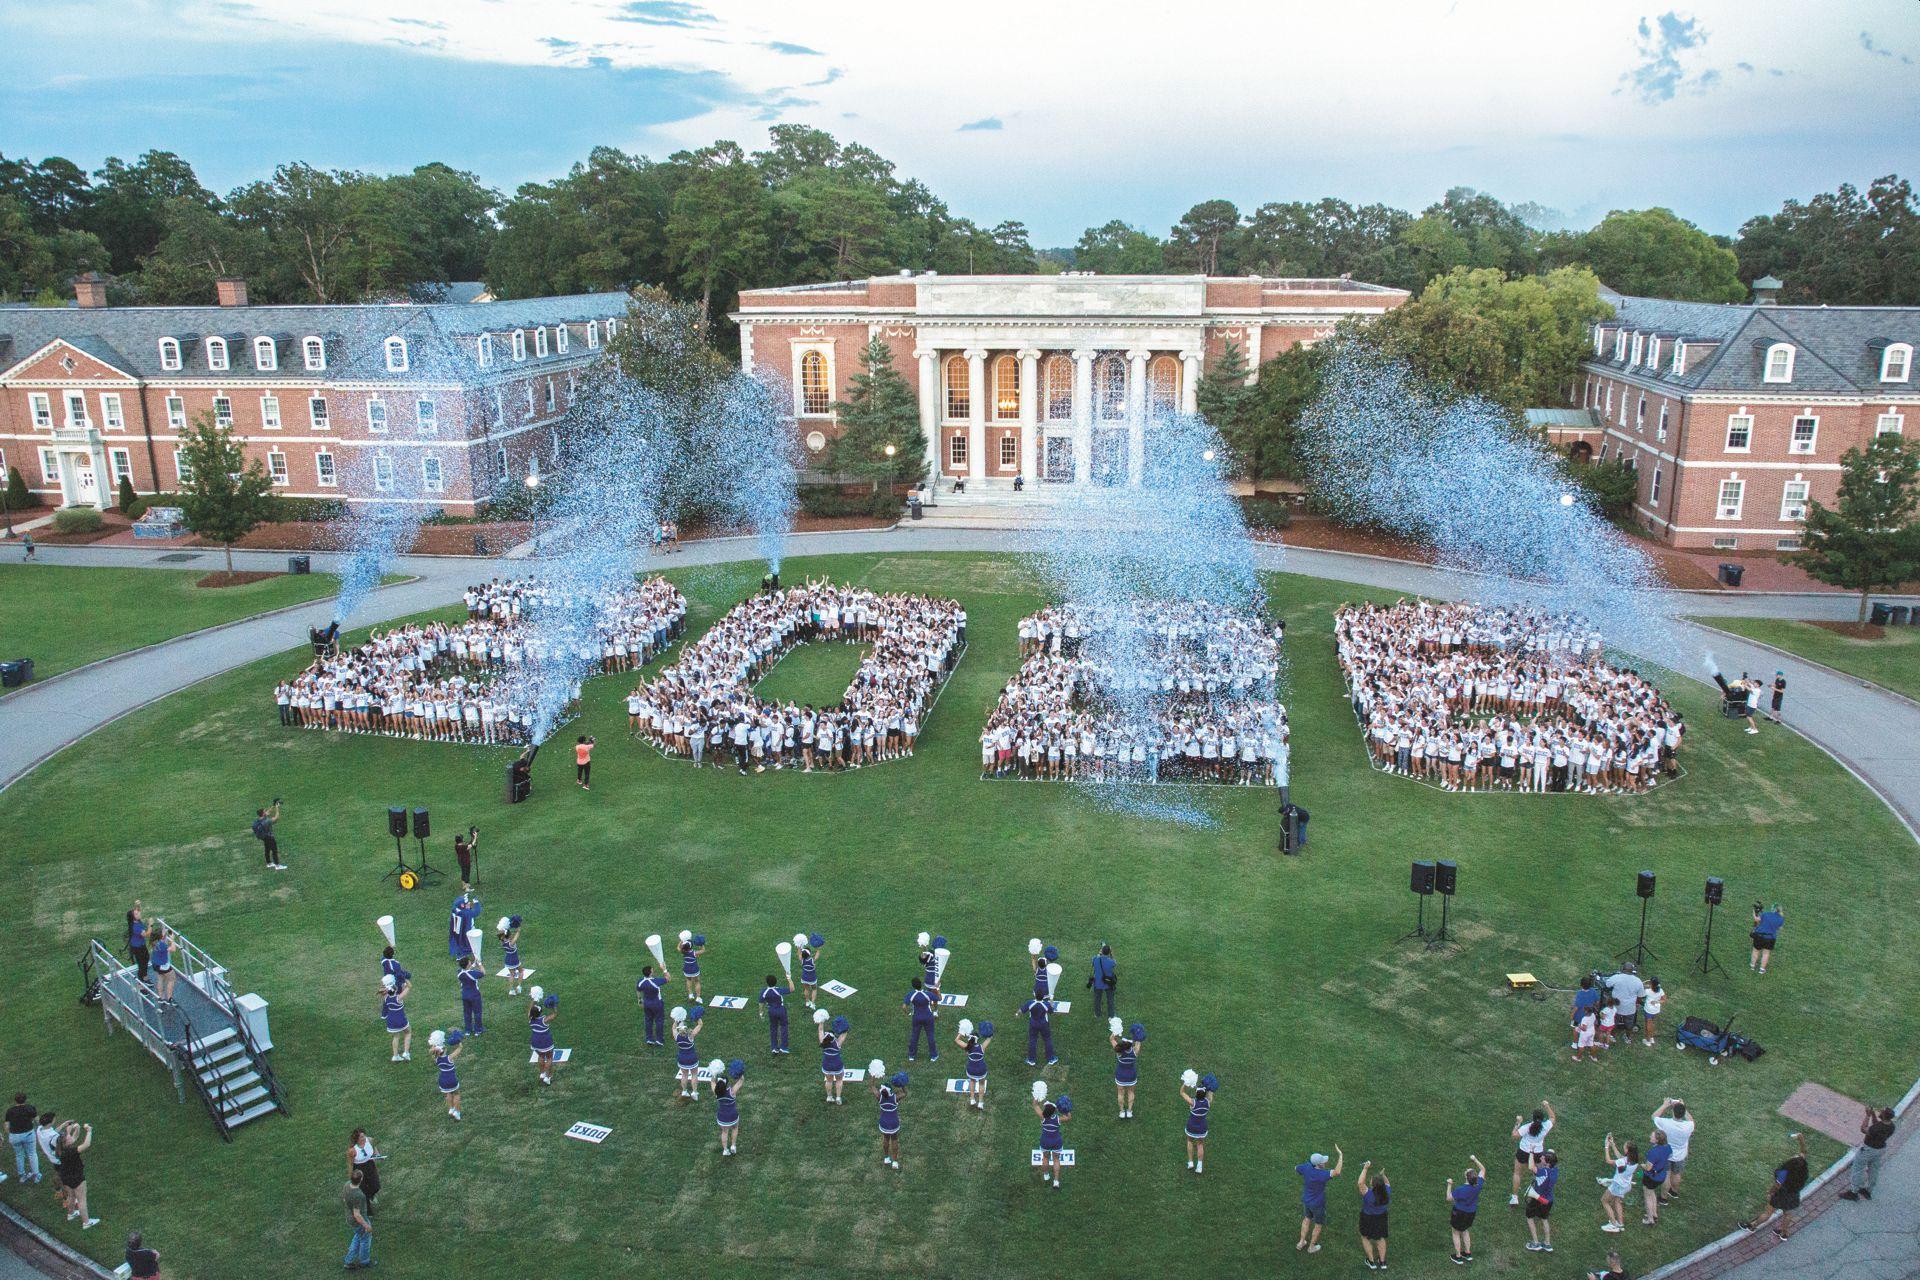 THUMBNAIL: Class of 2026 gathered together on the lawn of the campus in an aerial photograph. 